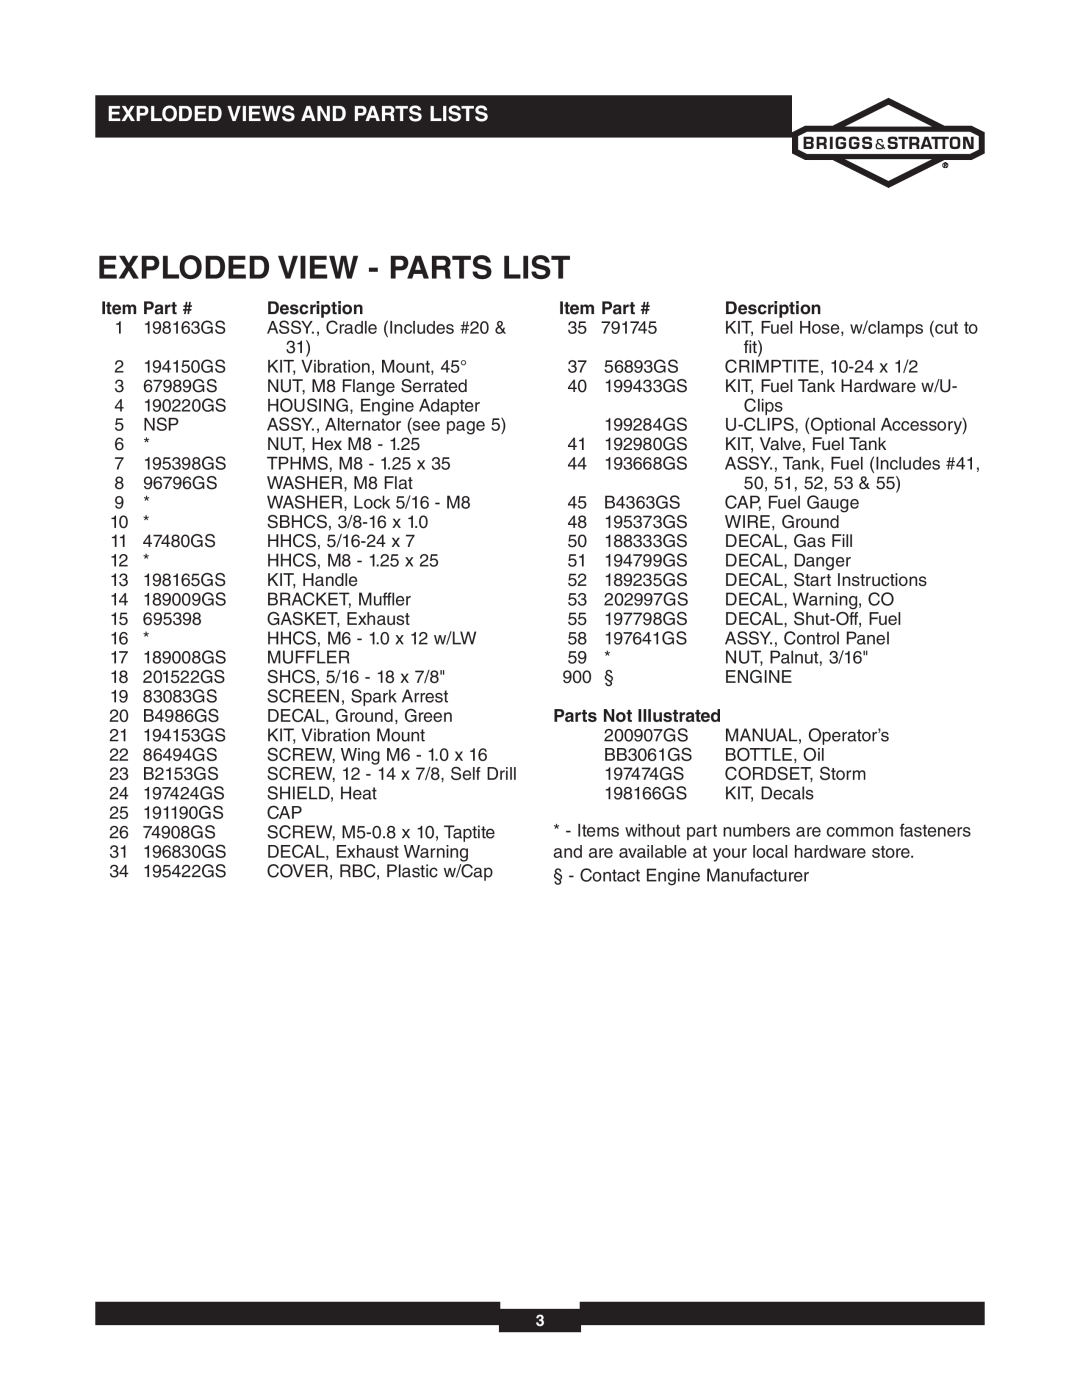 Briggs & Stratton 030235-02 Exploded View - Parts List, Description, Parts Not Illustrated, Exploded Views And Parts Lists 